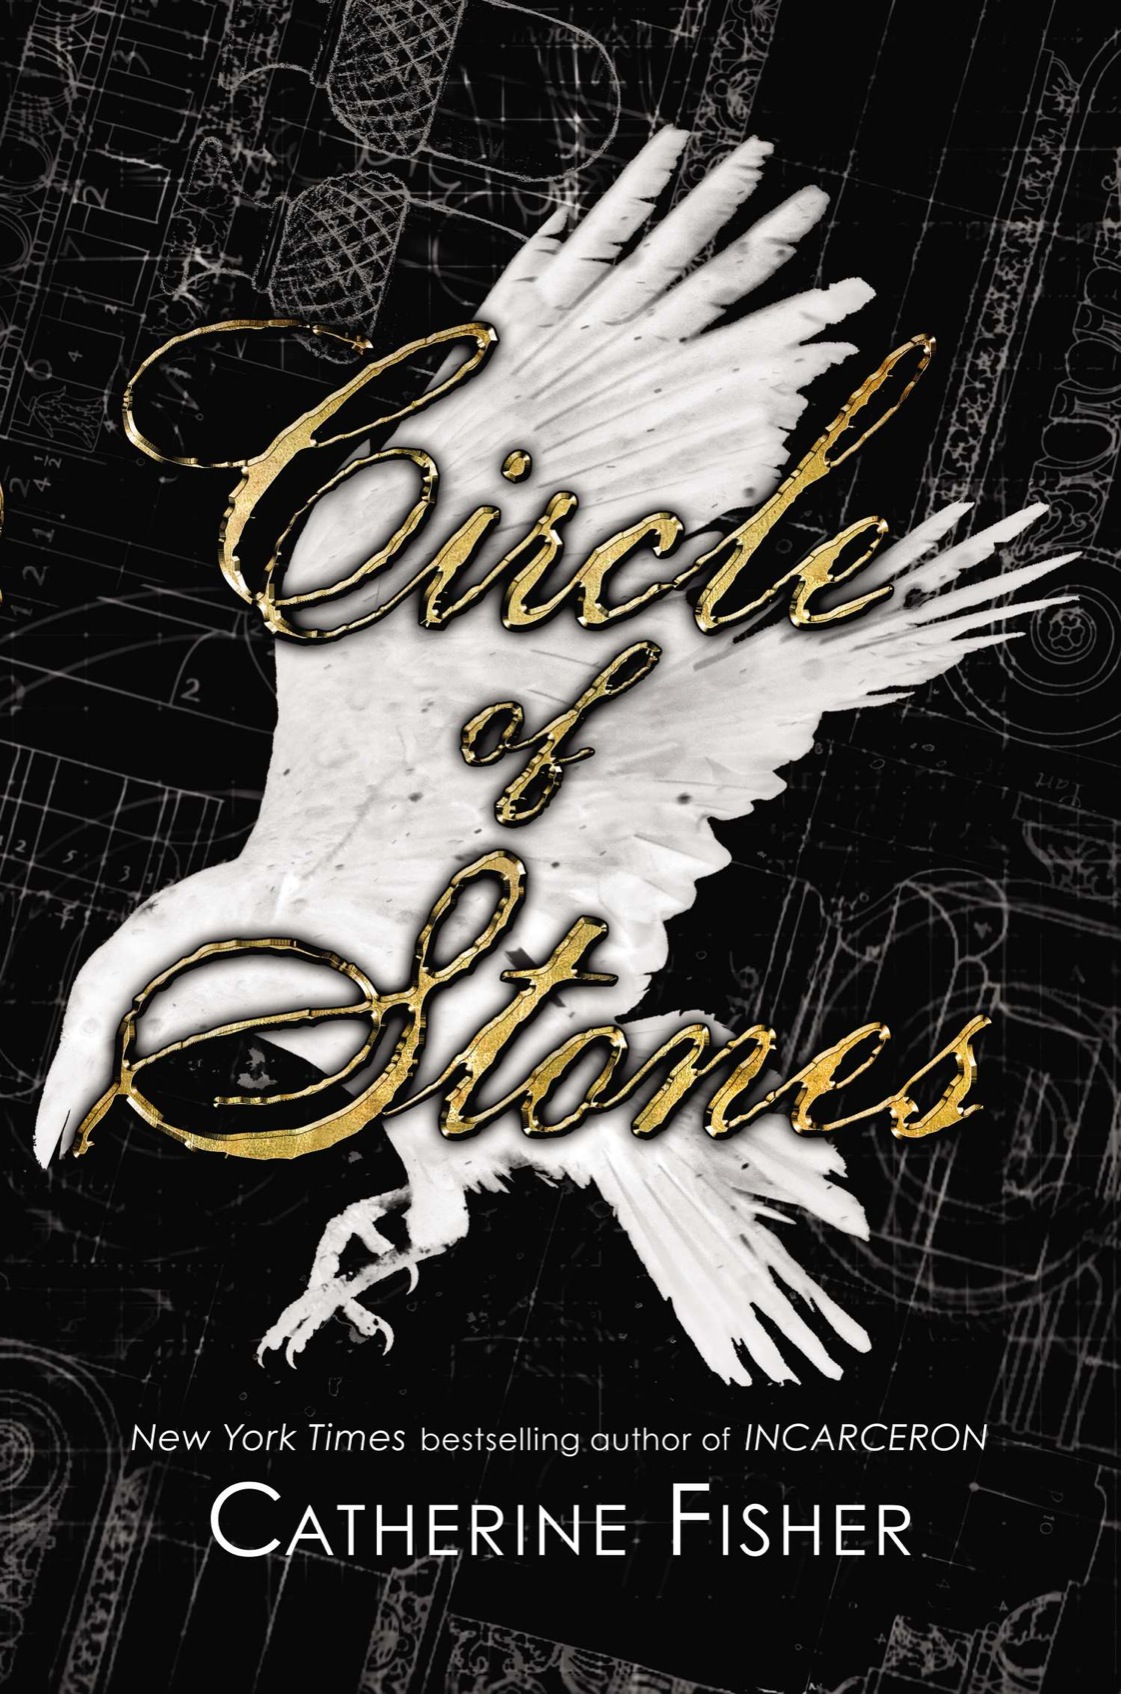 Circle of Stones (2014) by Catherine Fisher